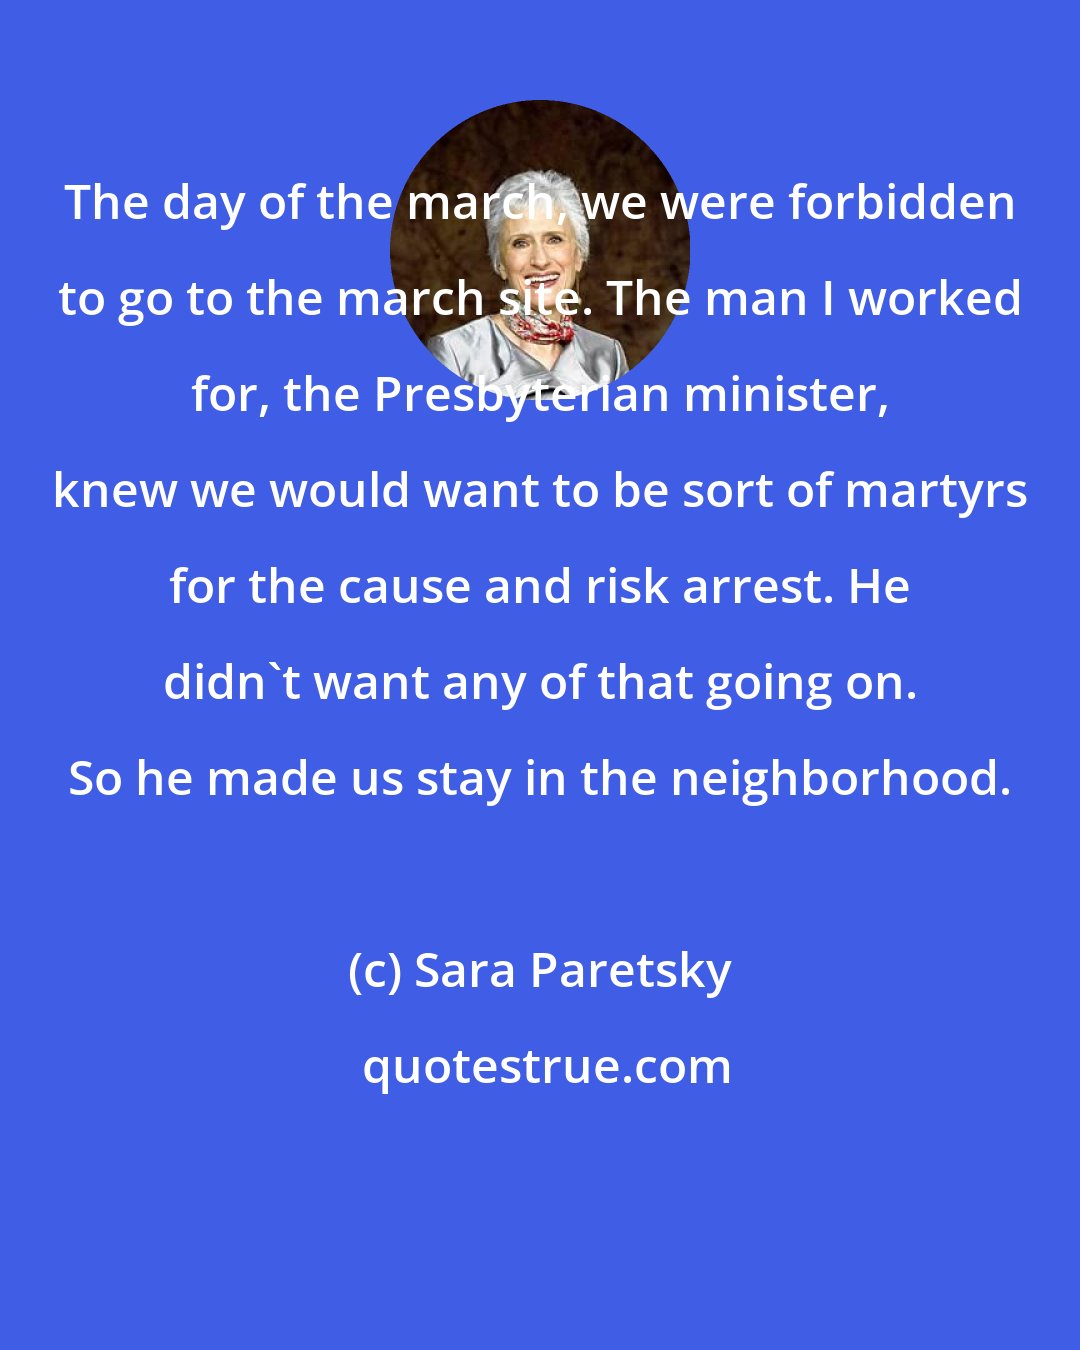 Sara Paretsky: The day of the march, we were forbidden to go to the march site. The man I worked for, the Presbyterian minister, knew we would want to be sort of martyrs for the cause and risk arrest. He didn't want any of that going on. So he made us stay in the neighborhood.